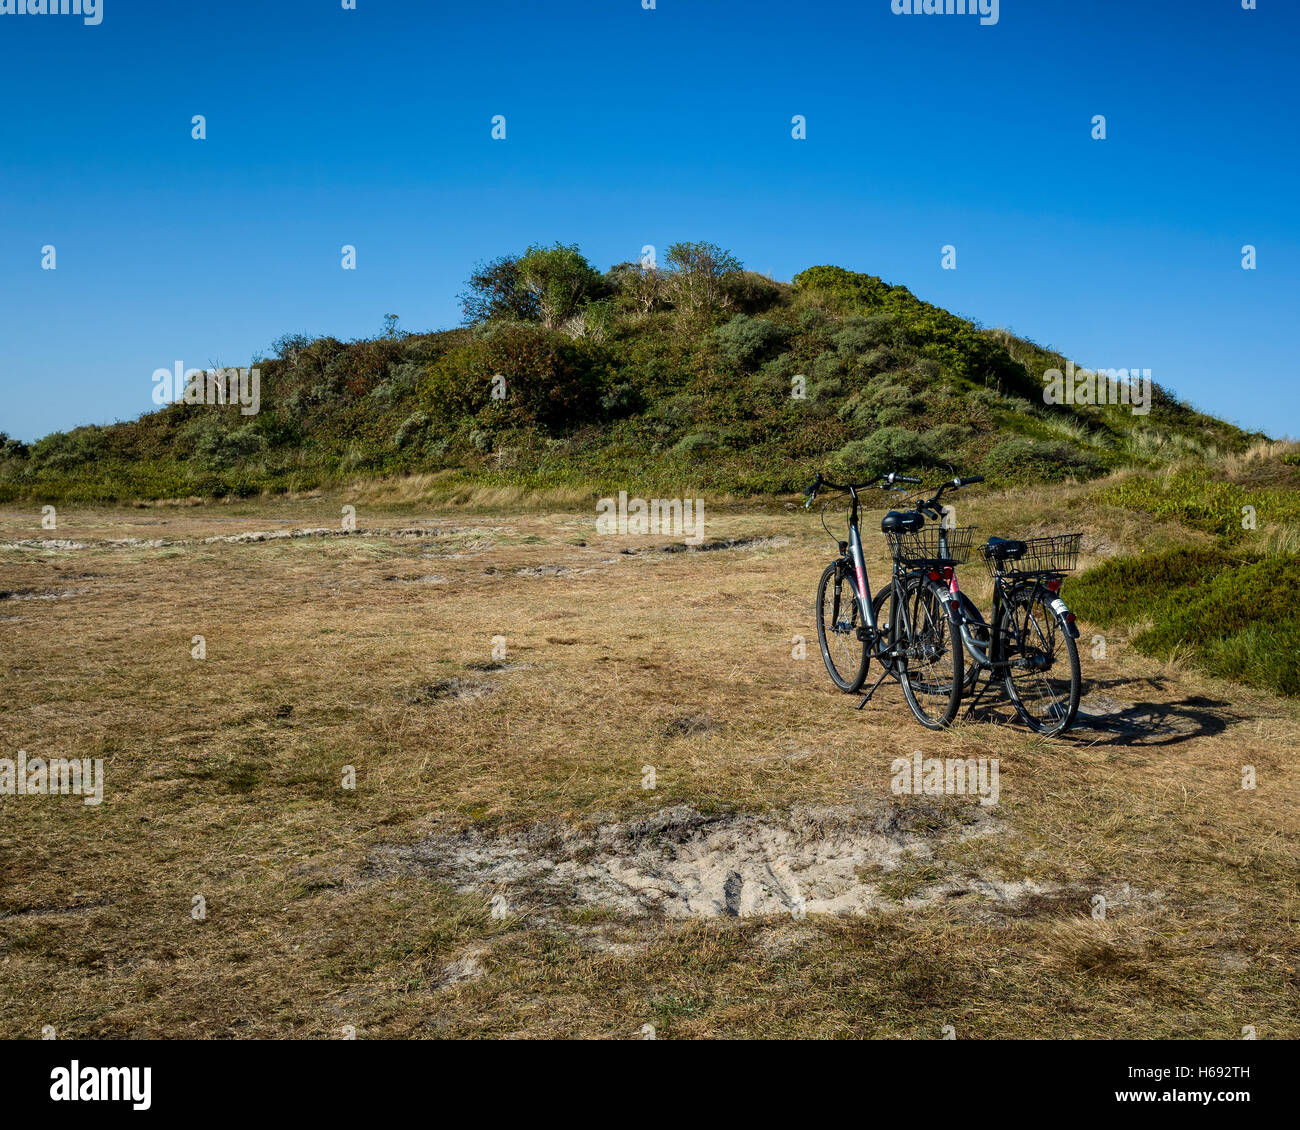 Melkhörndüne, Langeoog. Deutschland Germany.  A pair of traditional style hire bicycles parked at the base of the dunes.  It's a bright sunny day with clear blue skies. Stock Photo